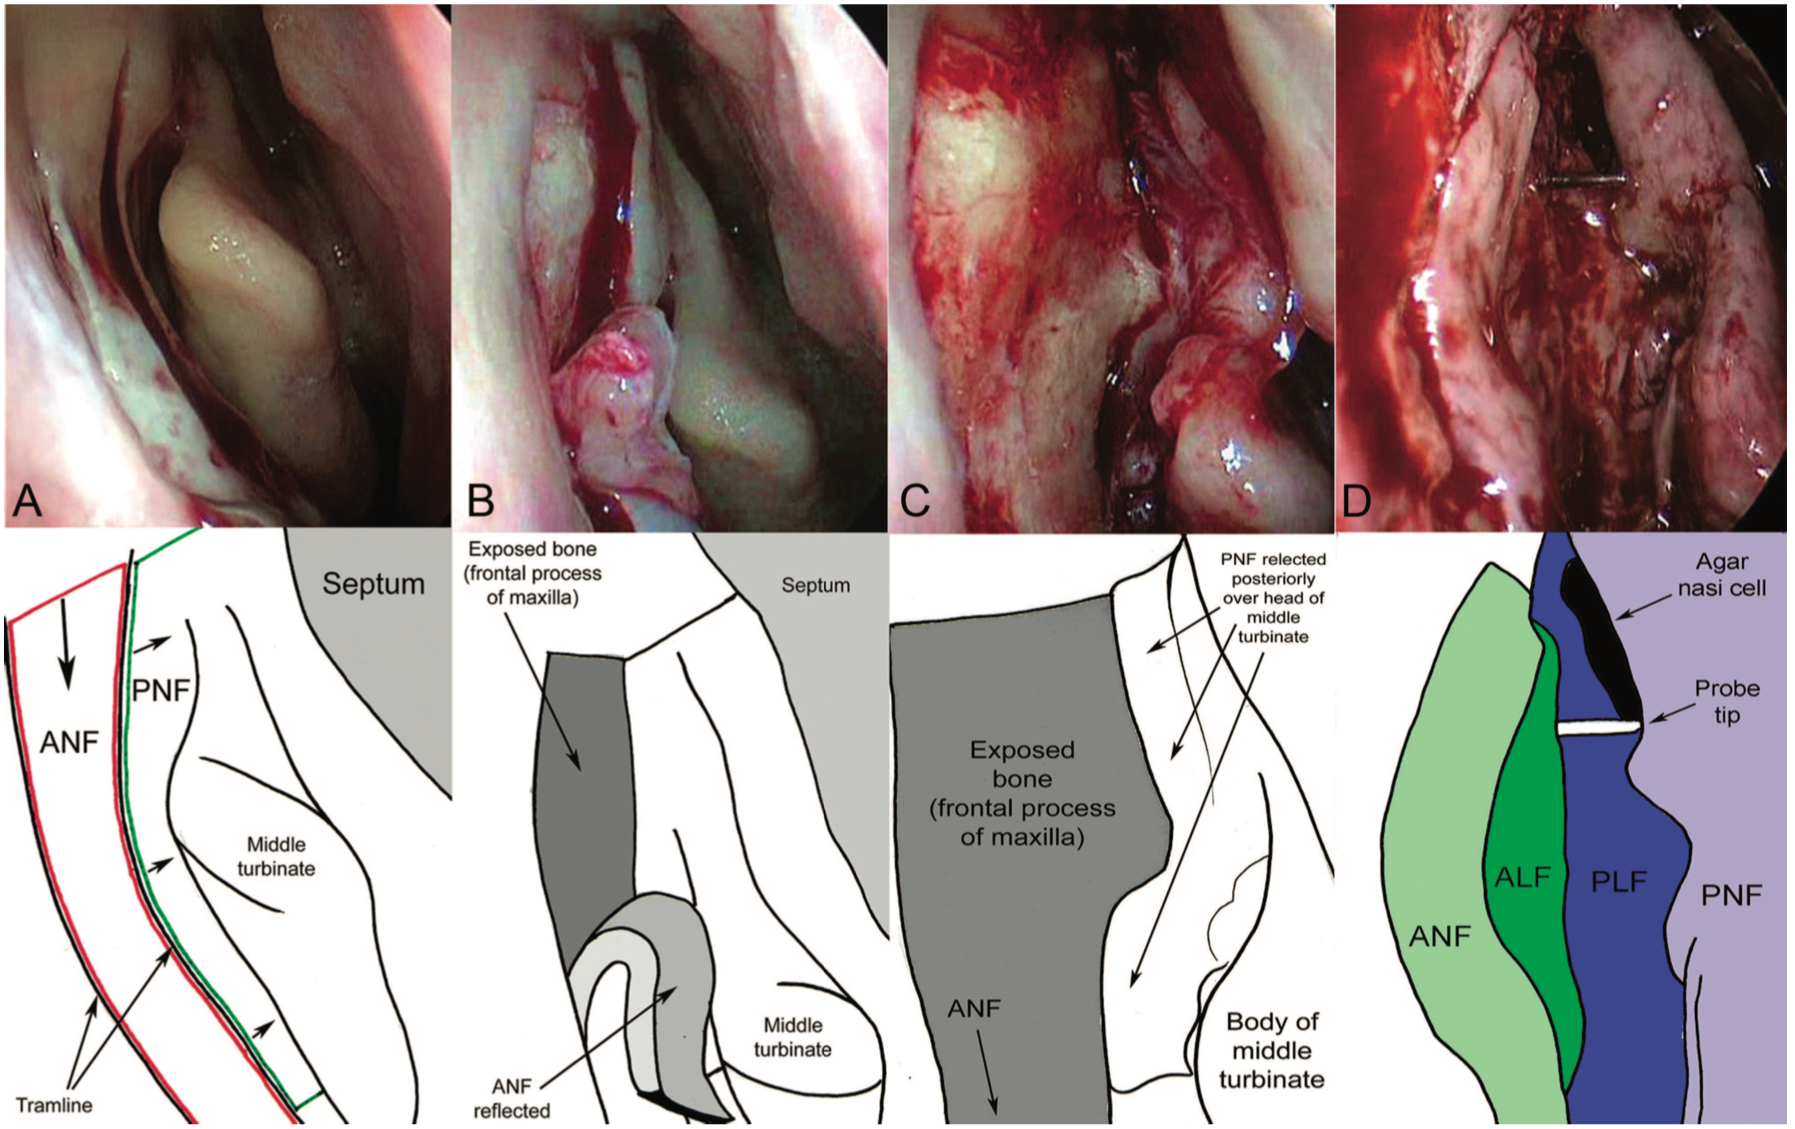 Creation of Mucosal Flaps in an Endoscopic Dacryocytorhinostomy: The right nasal cavity. A mucosal incision with a small angled crescent blade is made on the lateral nasal wall, 8 mm above the insertion of the middle turbinate extending down to just below the body of the middle turbinate. A parallel vertical incision made 8 mm anterior to this creates the tramline. A superior incision joining the 2 lines completes the anterior nasal flap (A). The flap is blunt dissected off bone and reflected inferiorly (B). Following reflection of the posterior nasal flap the maxillary bone is more widely exposed (C). Following lacrimal sac marsupialization, all 4 flaps are positioned with edge-to-edge apposition. The probe is seen in between the lacrimal flaps (D). We gratefully acknowledge the work of Francois Codere and Peter J. Wormald in the development of this novel flap design. ANF, anterior nasal flap; PNF, posterior nasal flap; ALF, anterior lacrimal flap; PLF, posterior lacrimal flap.